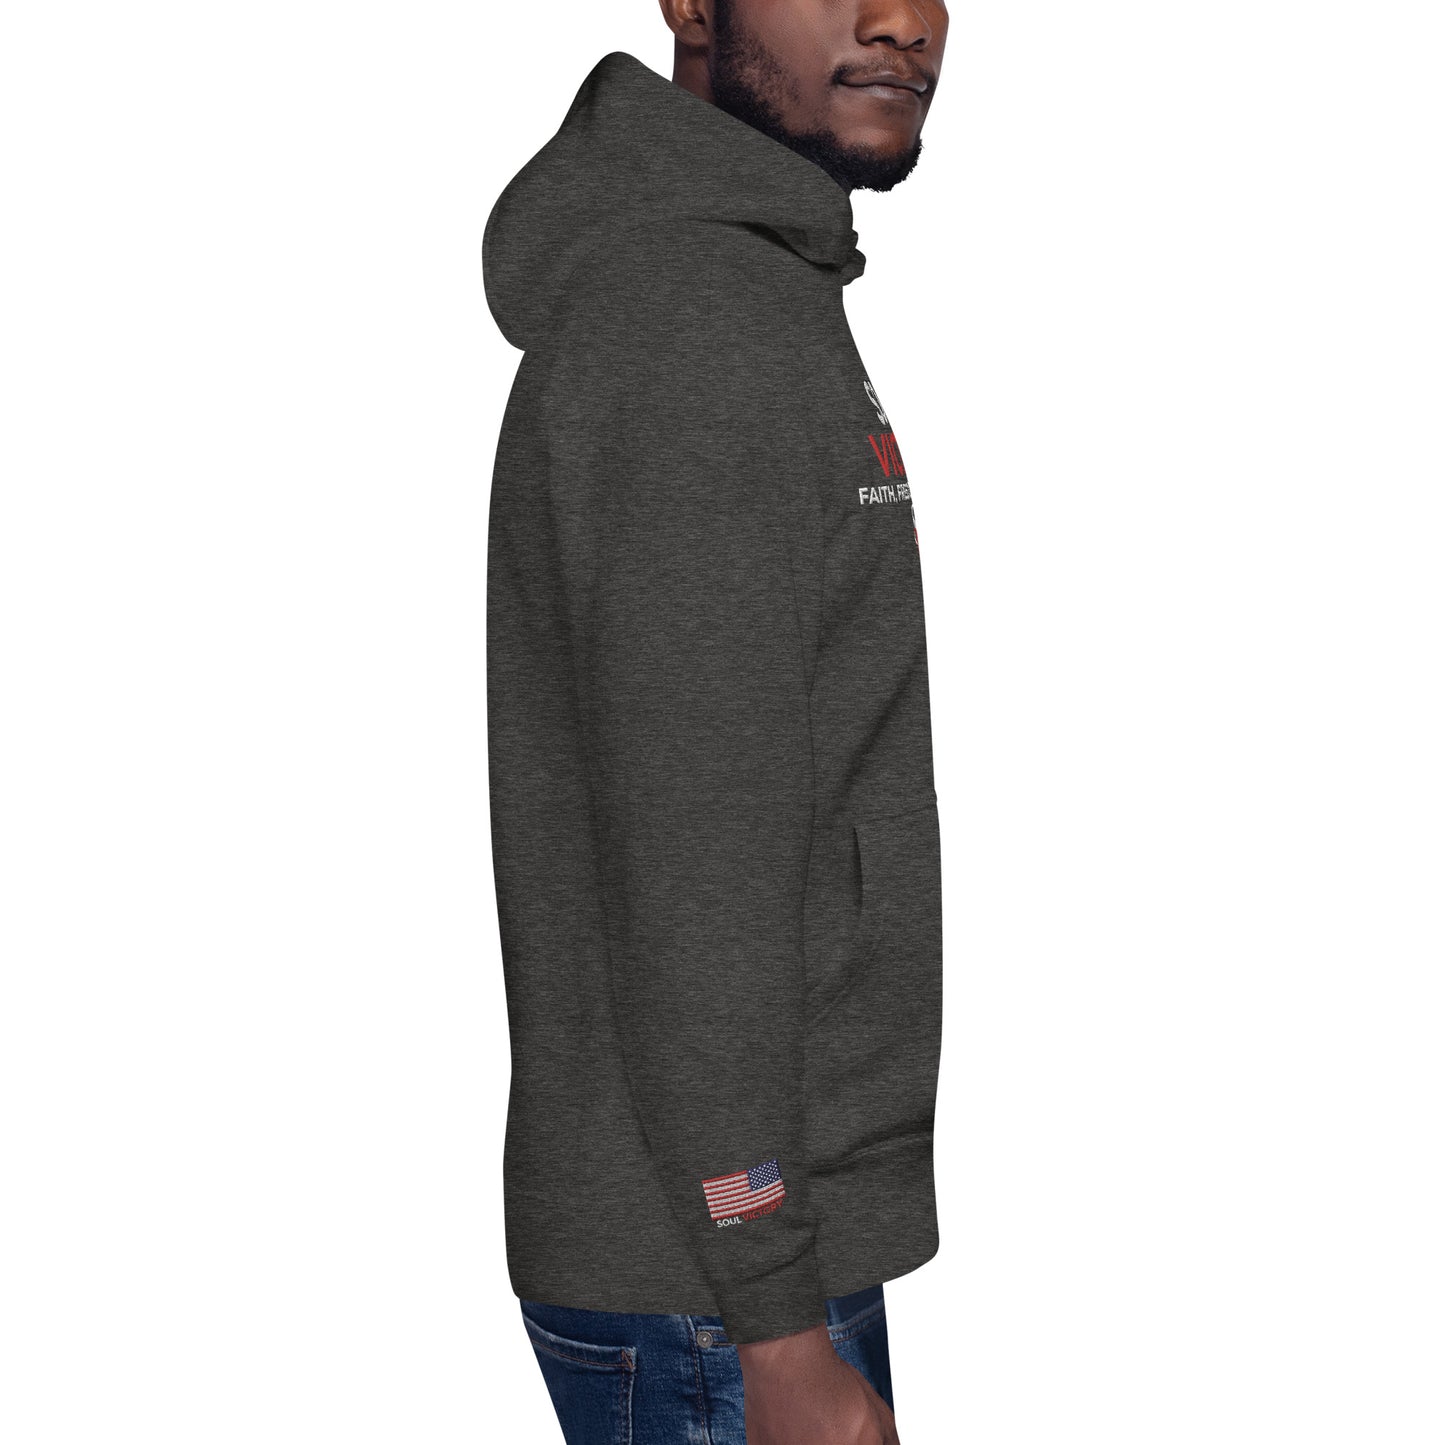 Men's 3F's Embroidered Hoodie